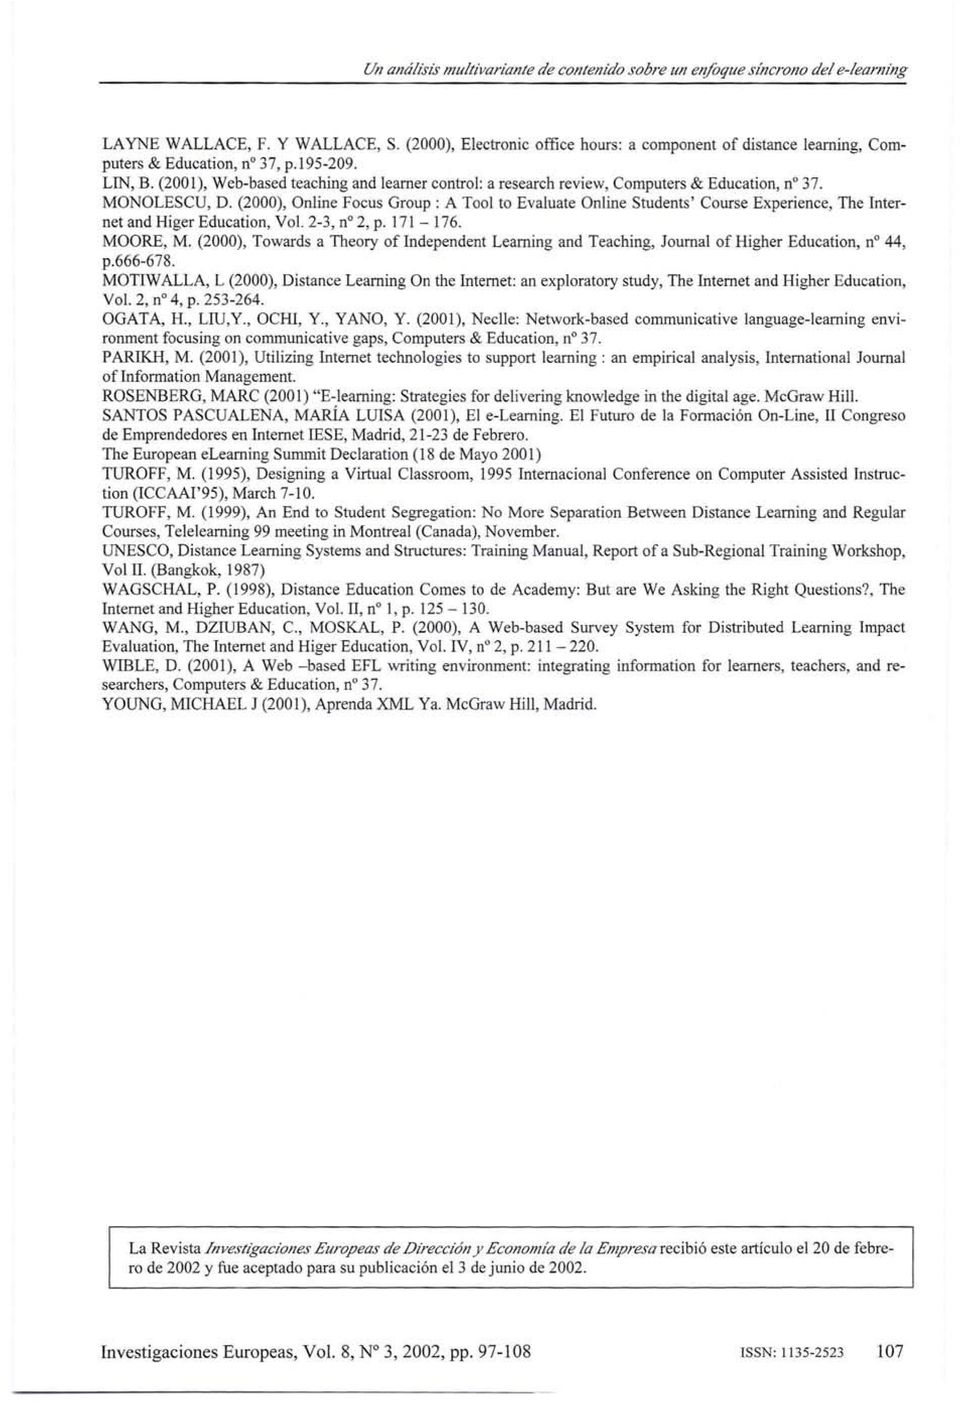 (2001), Web-based teaching and learner control: a research review, Computers & Education, n 37. MONOLESeU, D.